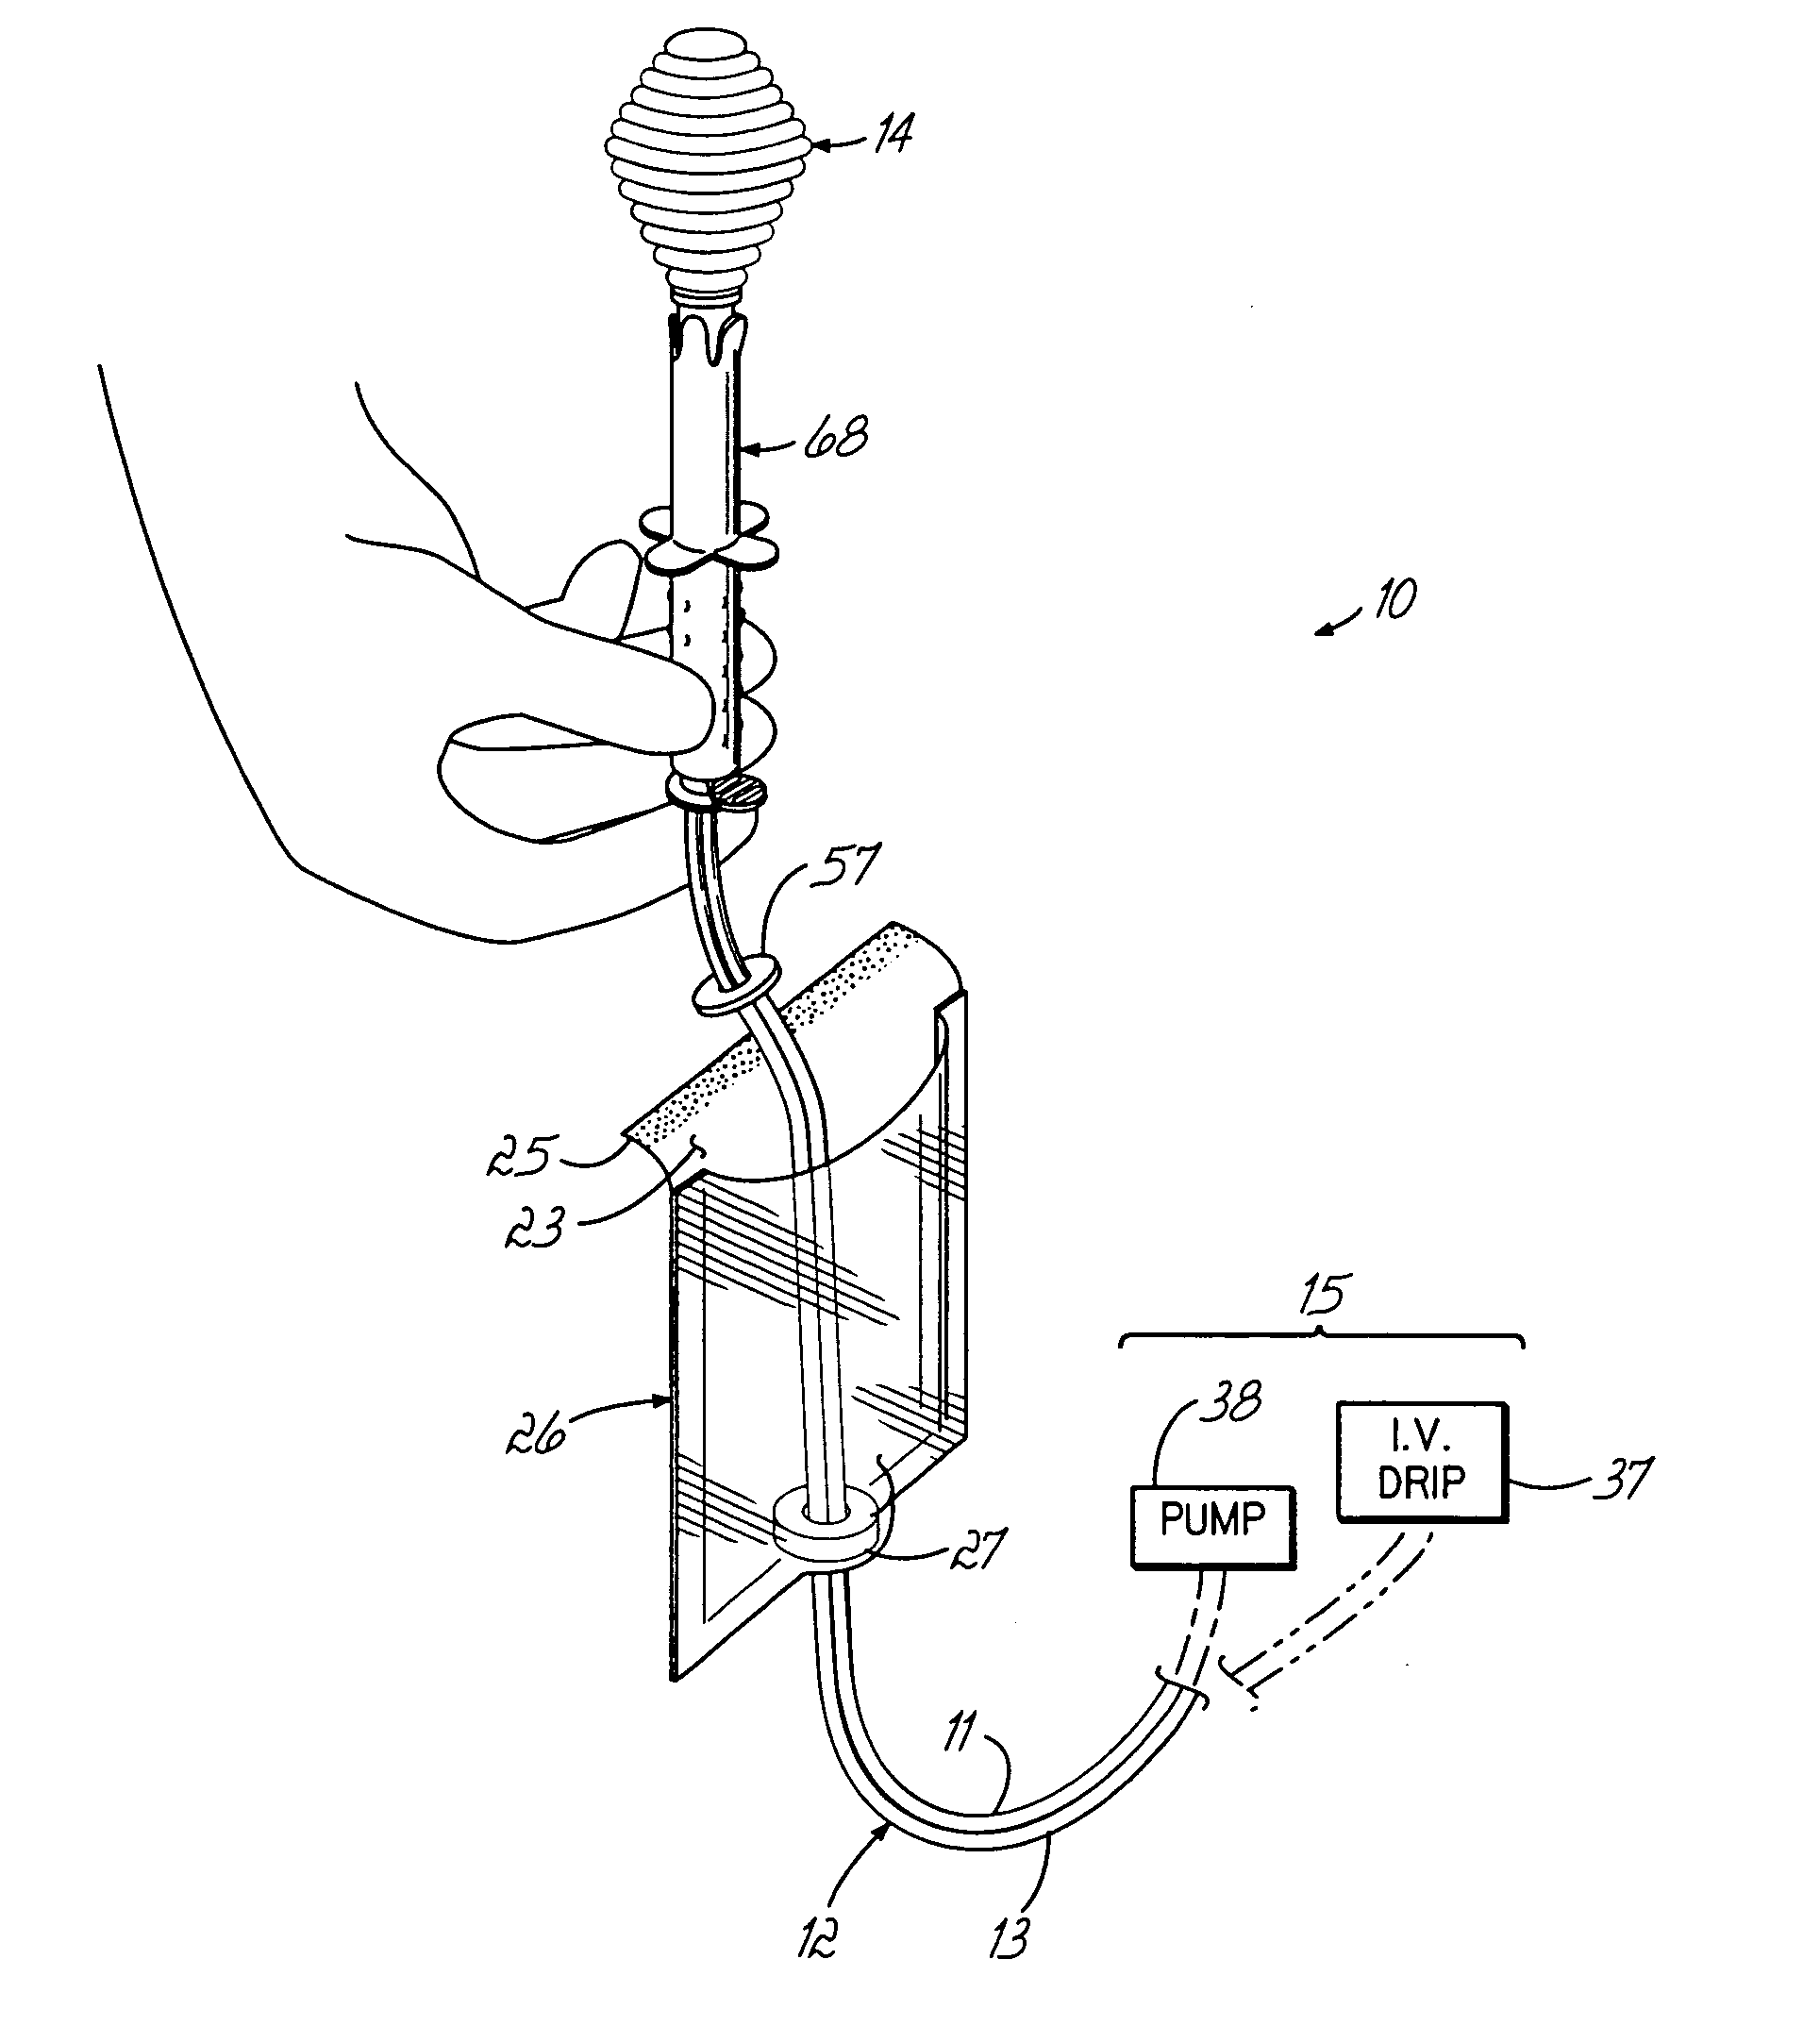 System and method using the rectal mucosal membrane for inducing hypothermia and warming